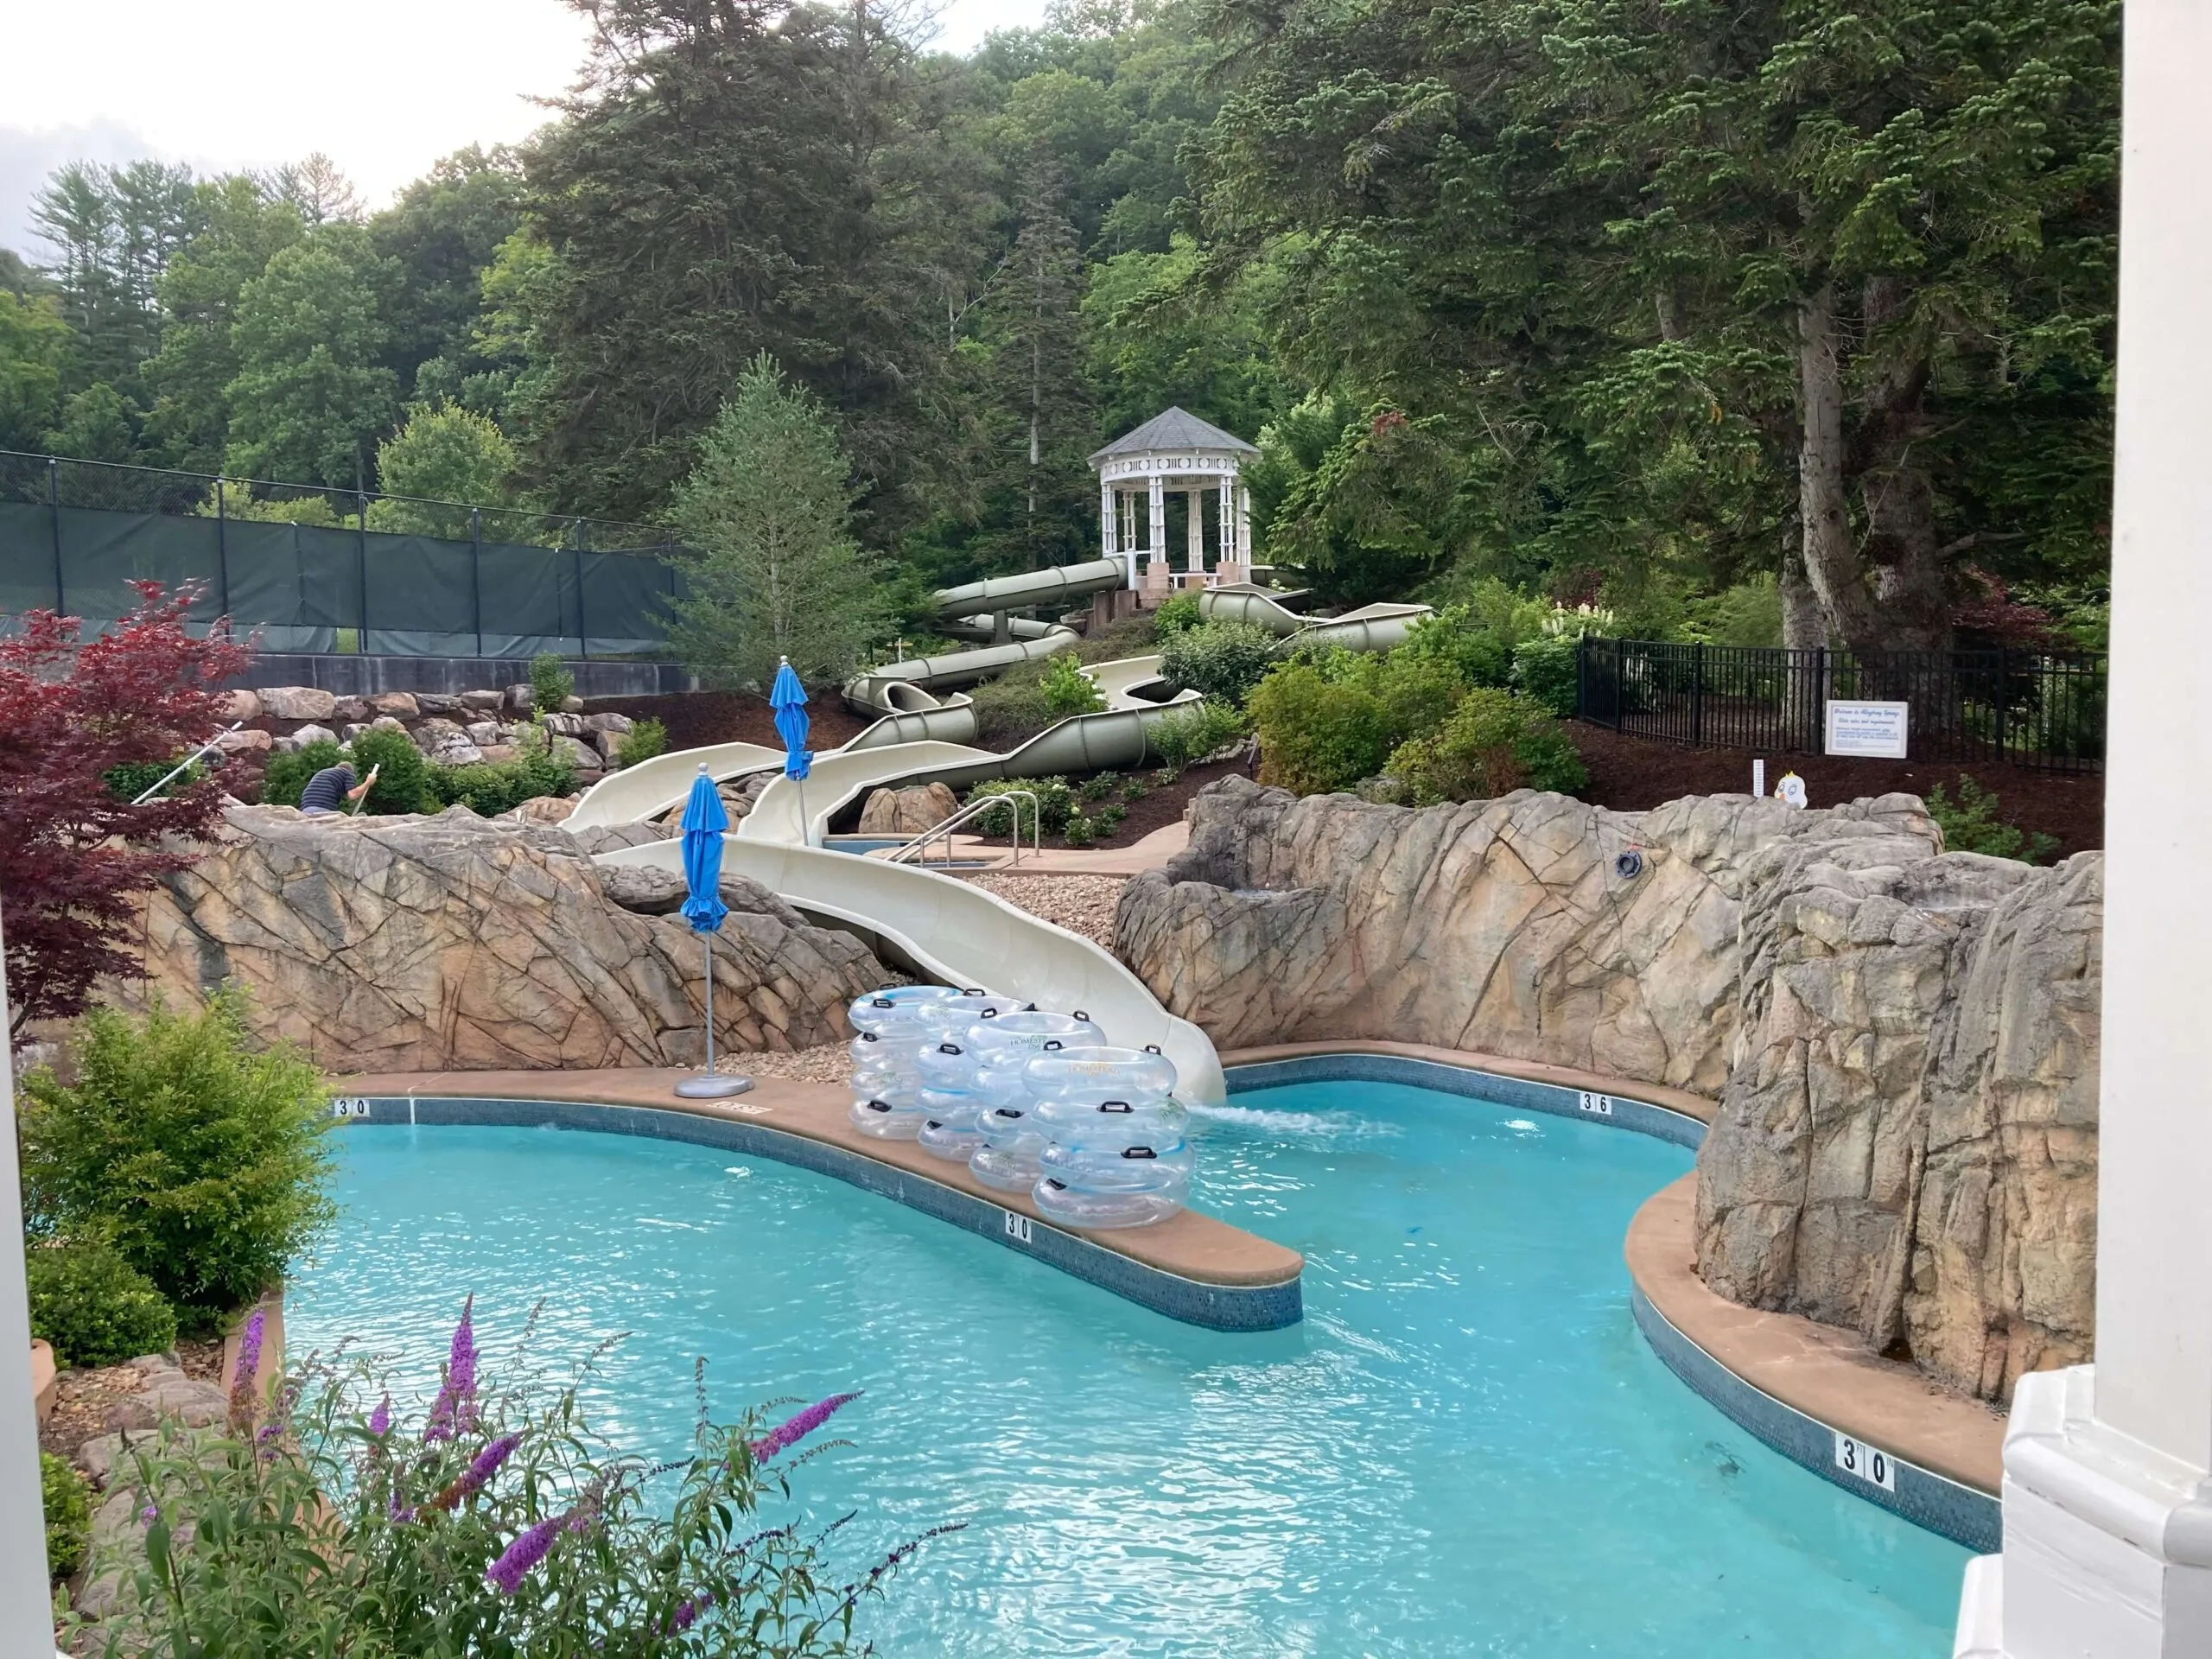 The newly renovated pools at The Omni Homestead resort in Hot Springs, Virginia.